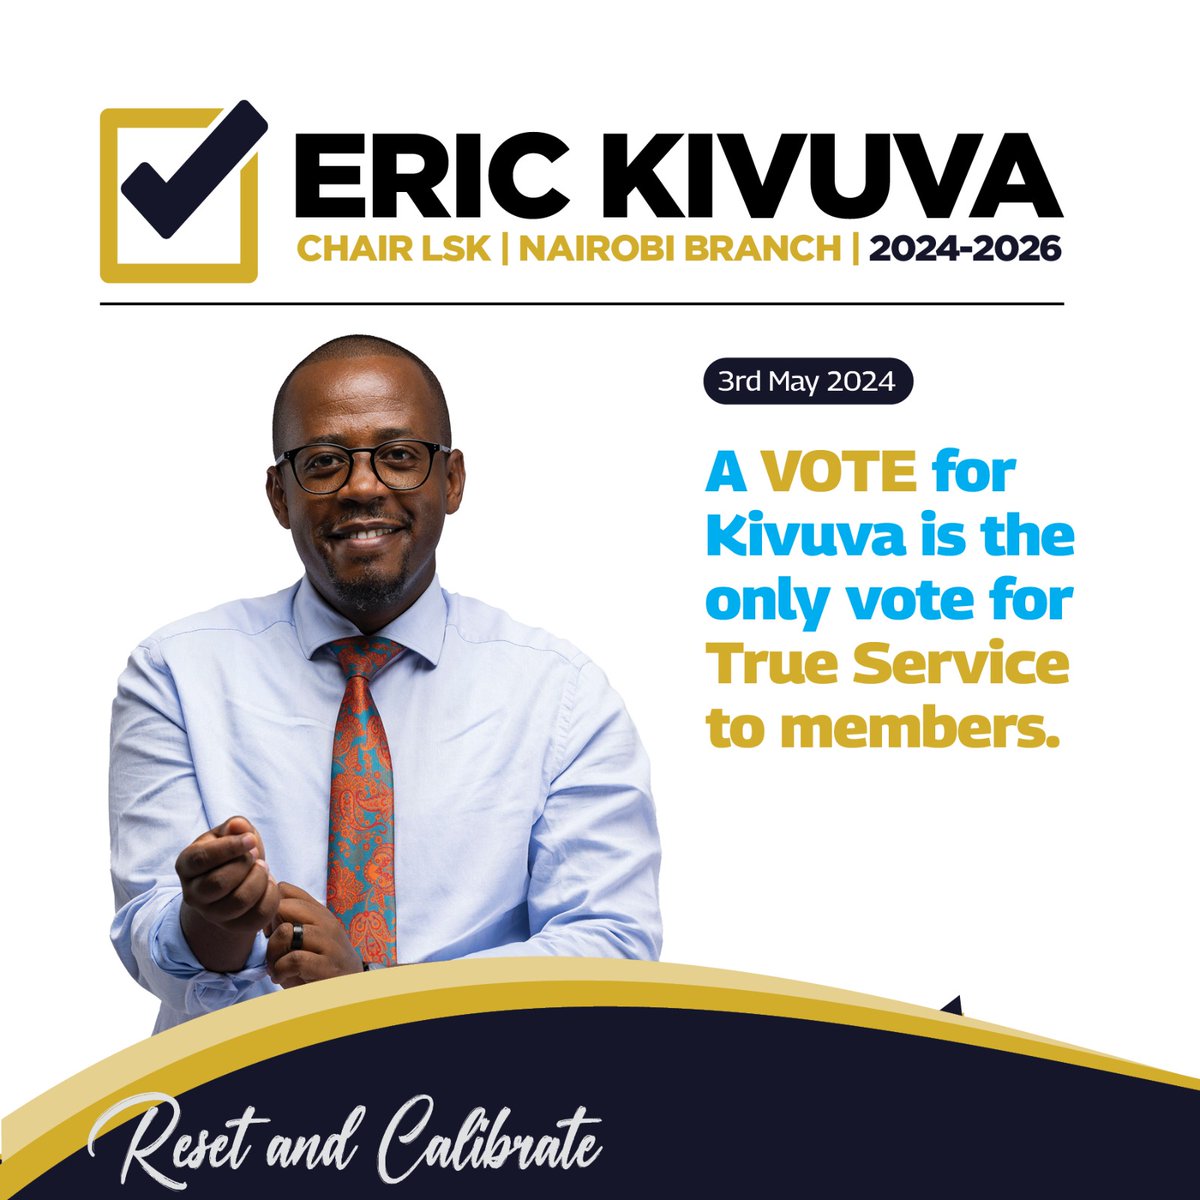 Eric's passion for promoting diversity and inclusion within the legal profession aligns with the values of the Nairobi branch and the LSK as a whole. Eric Kivuva
#KivuvaNairobiLSK